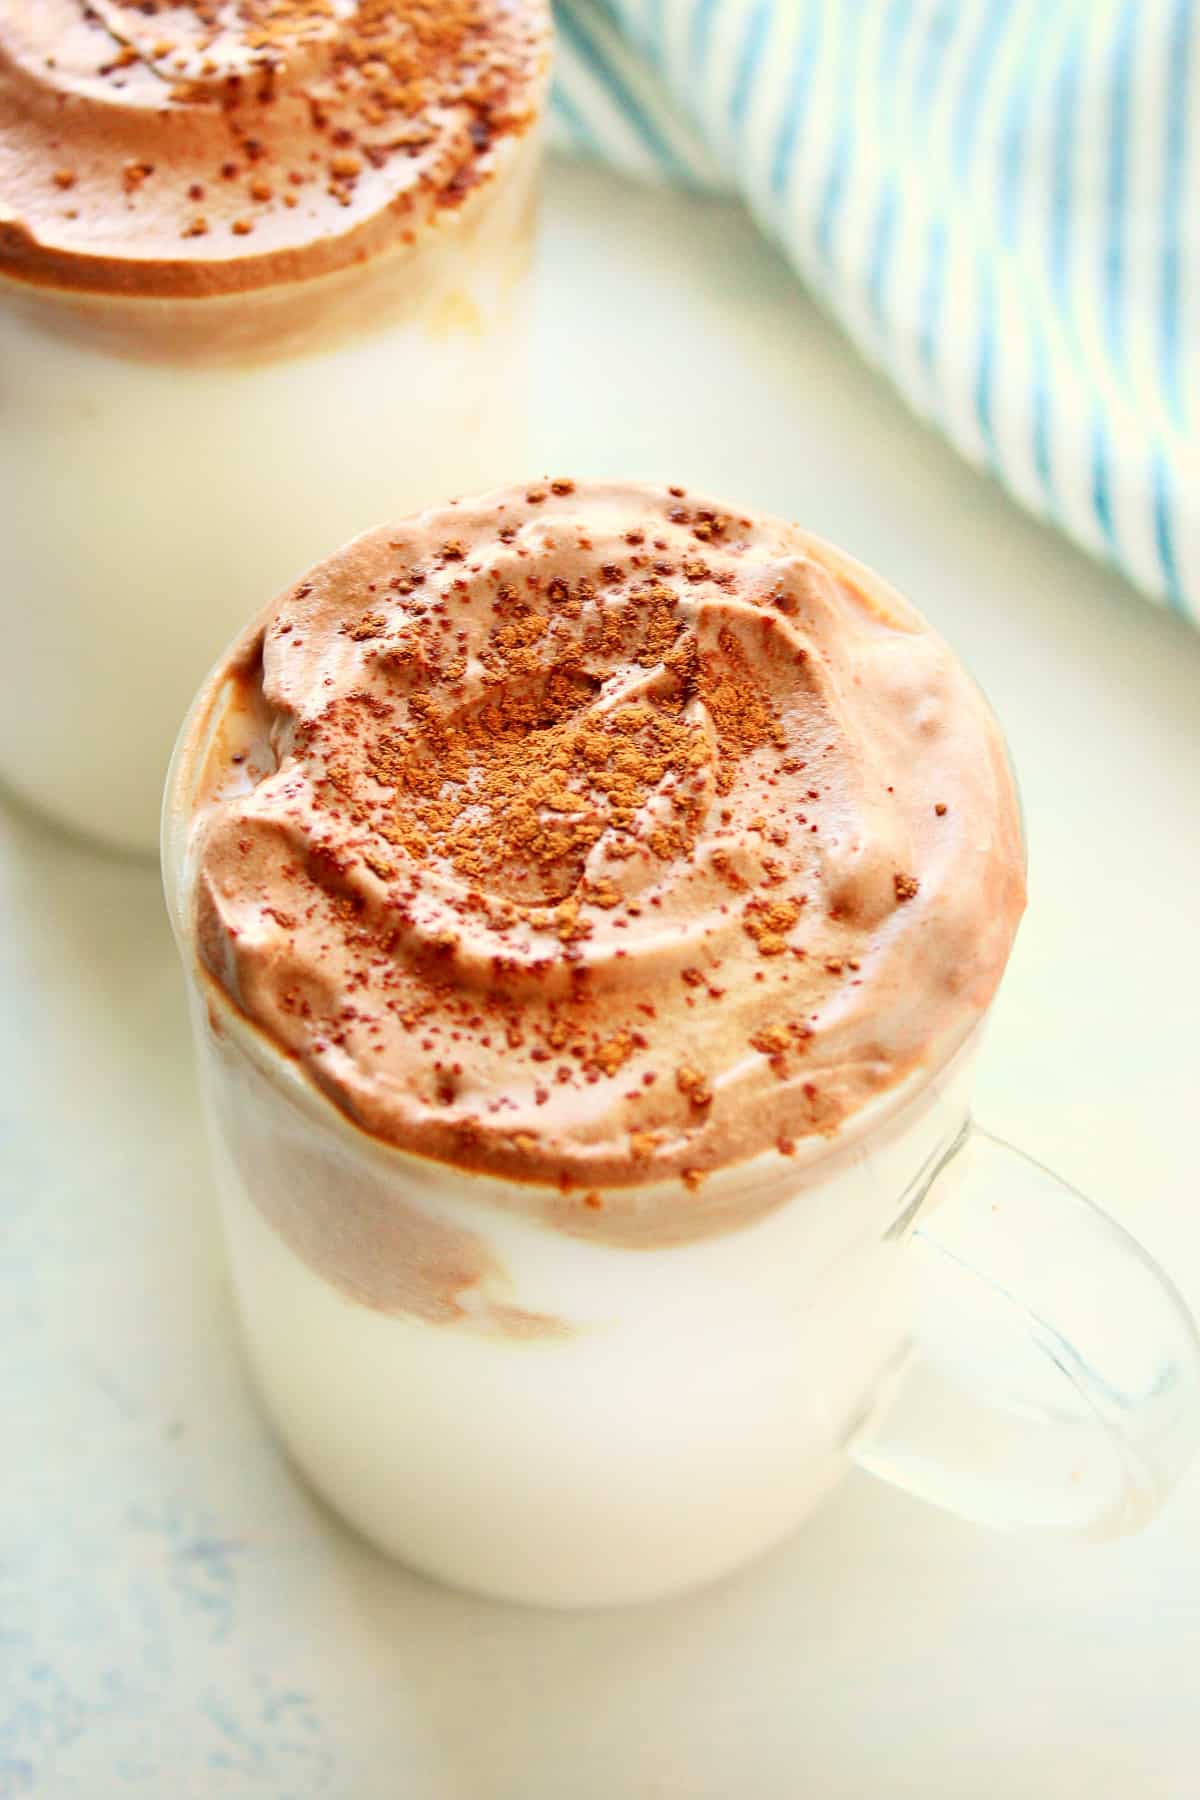 Whipped hot chocolate in a glass.